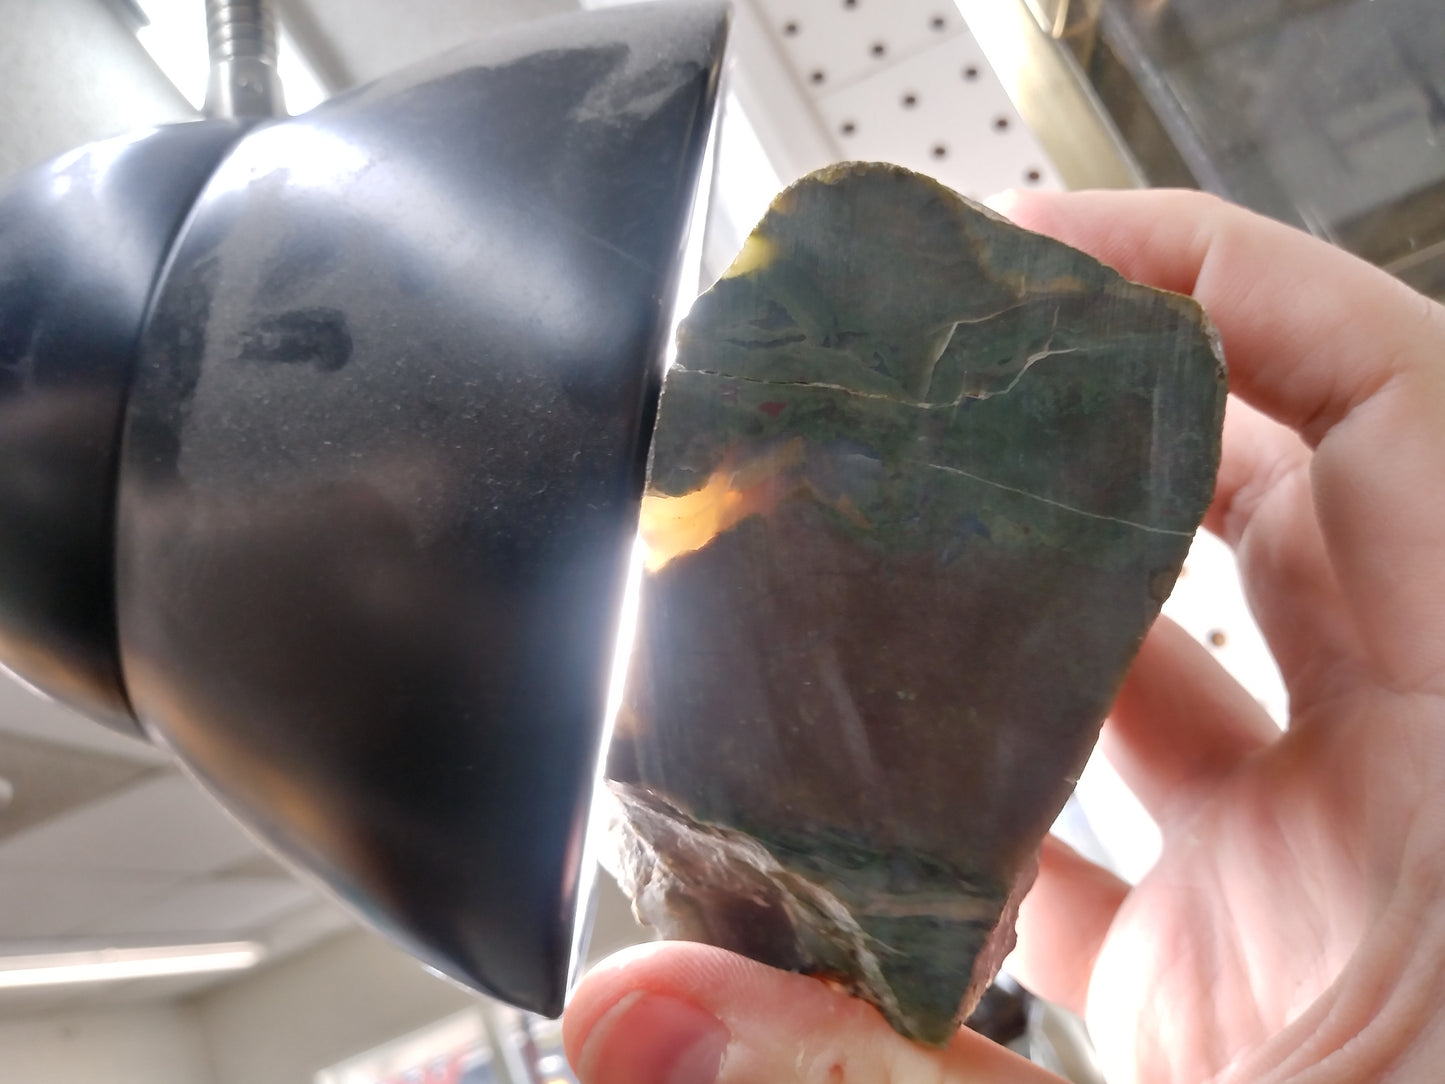 Indonesian Moss Agate Rough